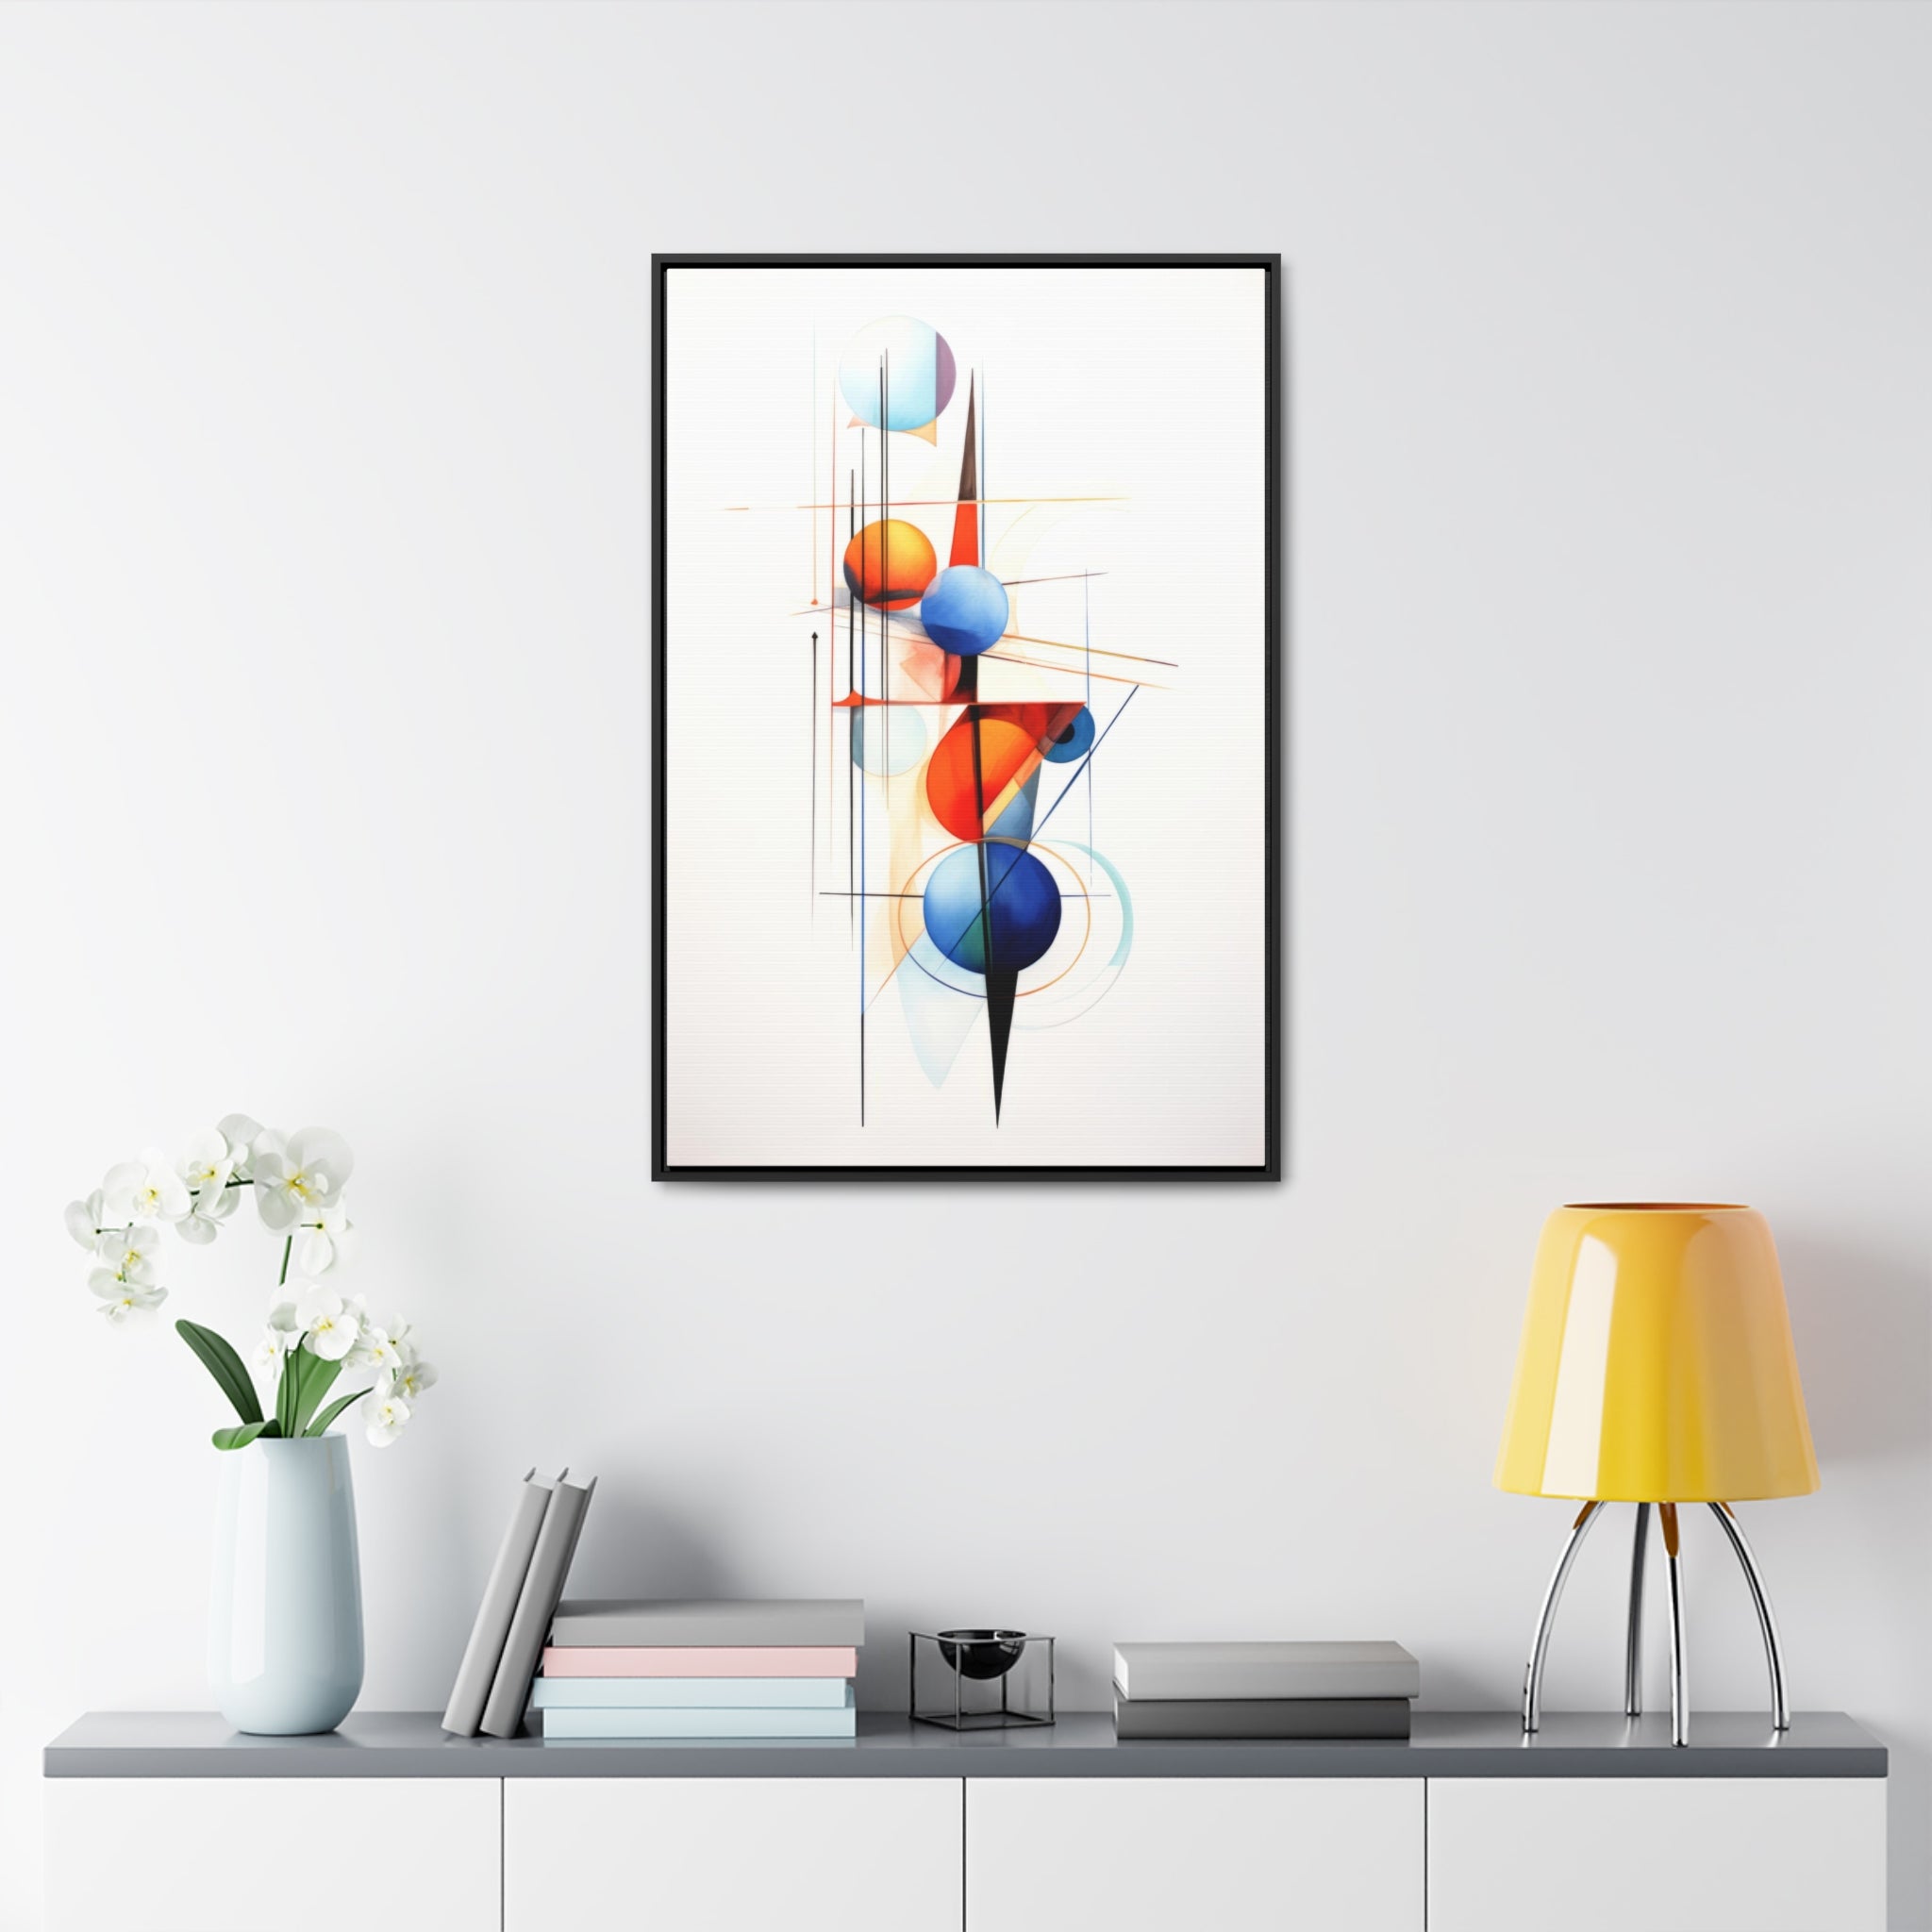 Geometric Abstract |Gallery Canvas Wraps, Vertical Frame